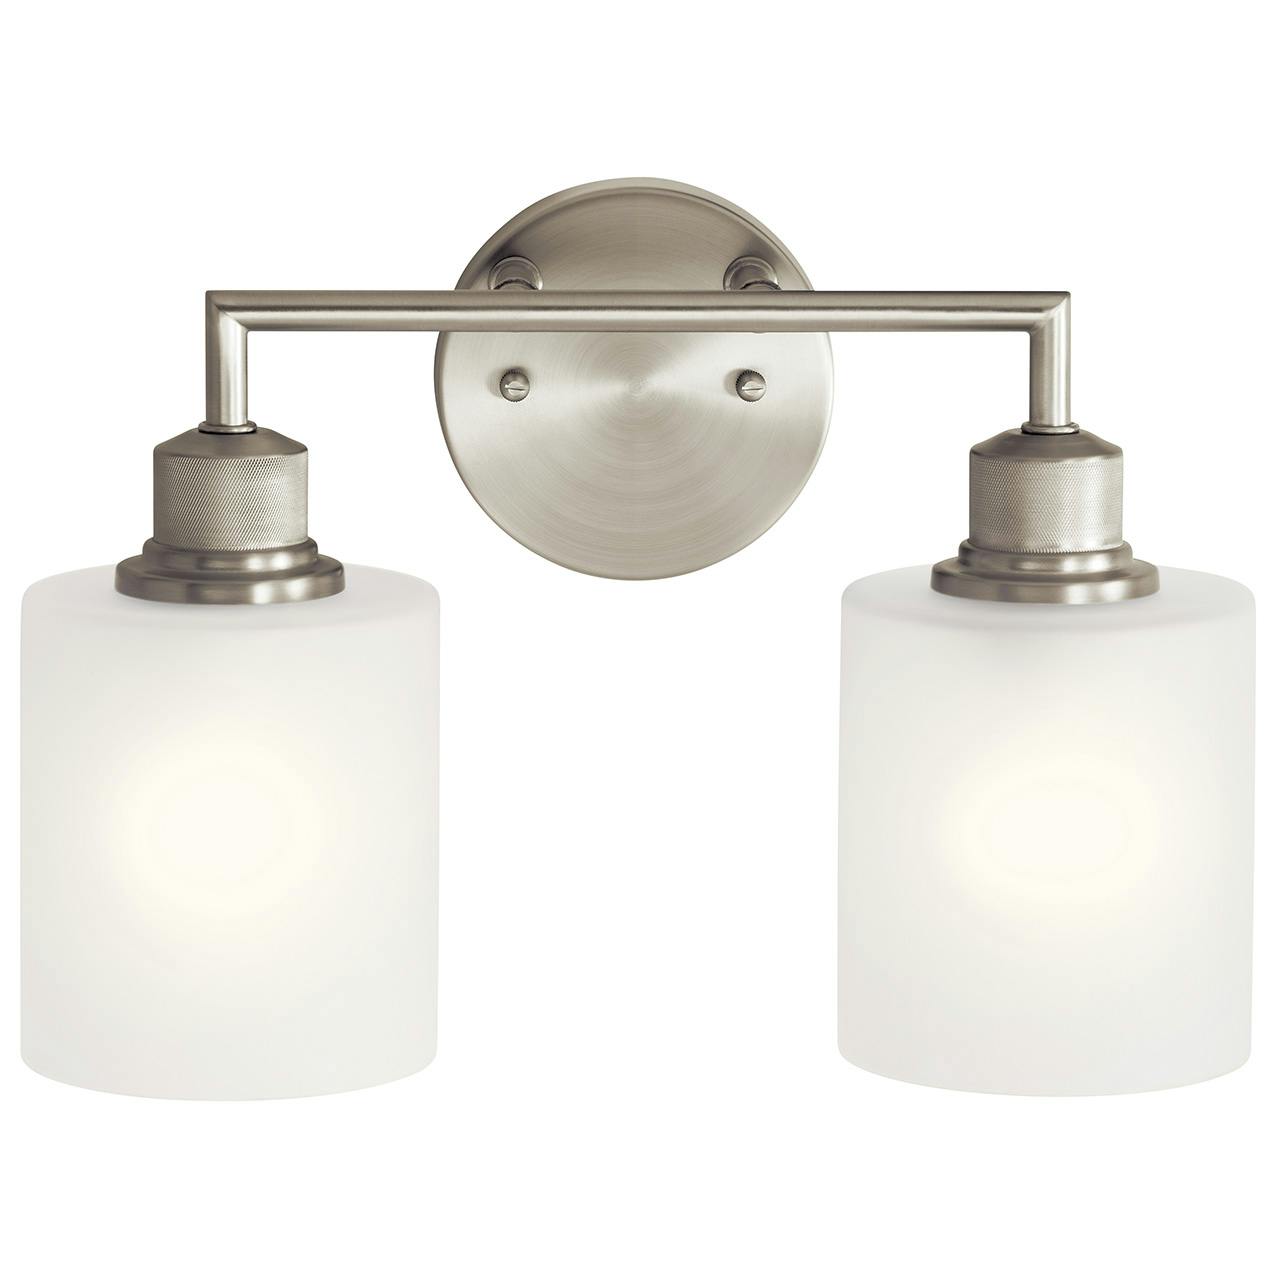 The Lynn Haven 2 Light Vanity Light Nickel facing down on a white background